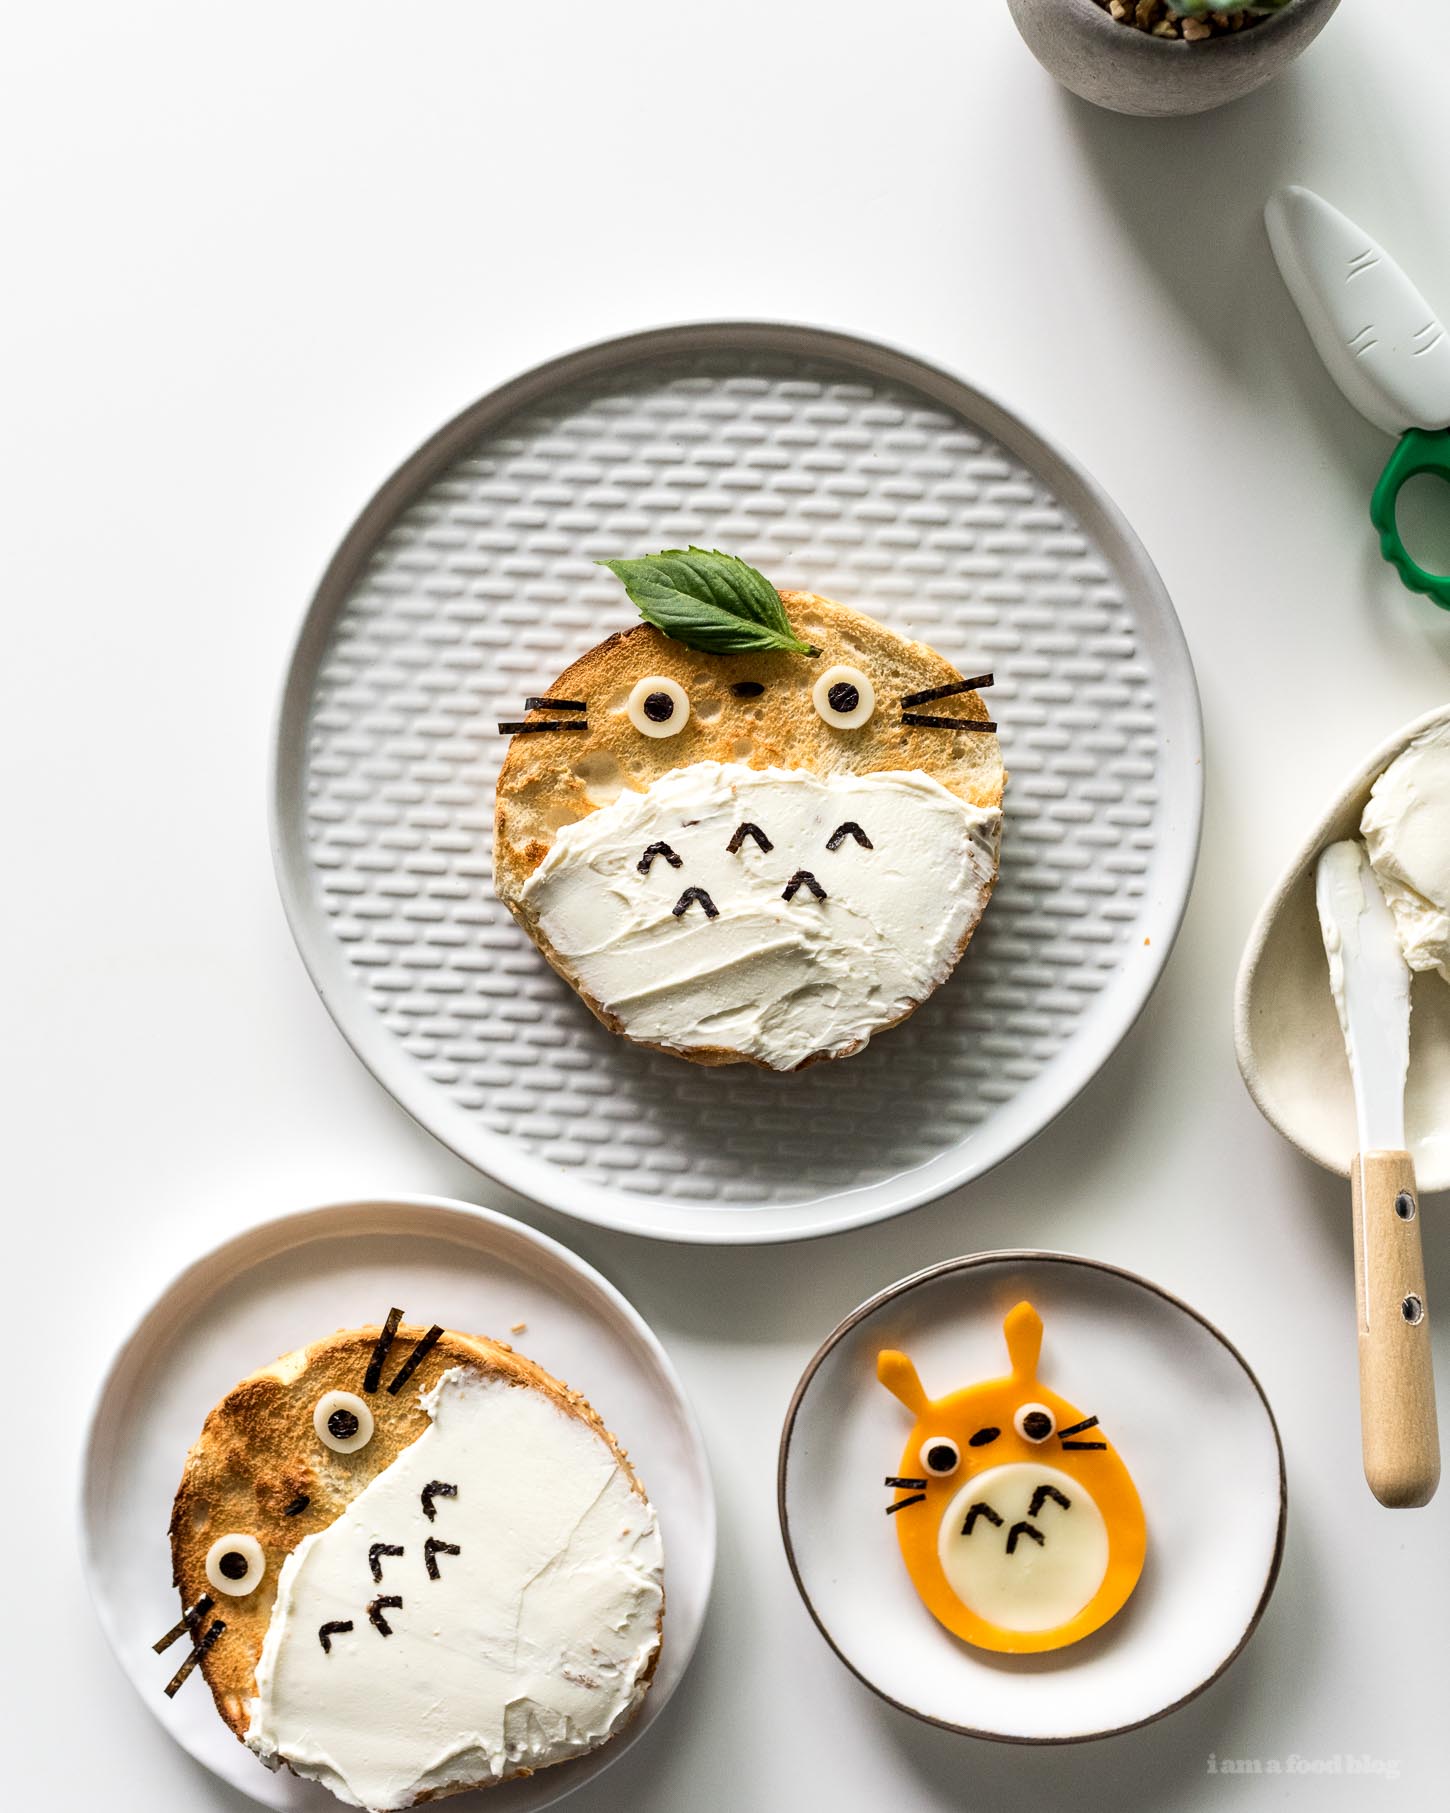 How to Make a Totoro Cream Cheese Bagel | www.iamafoodblog.com